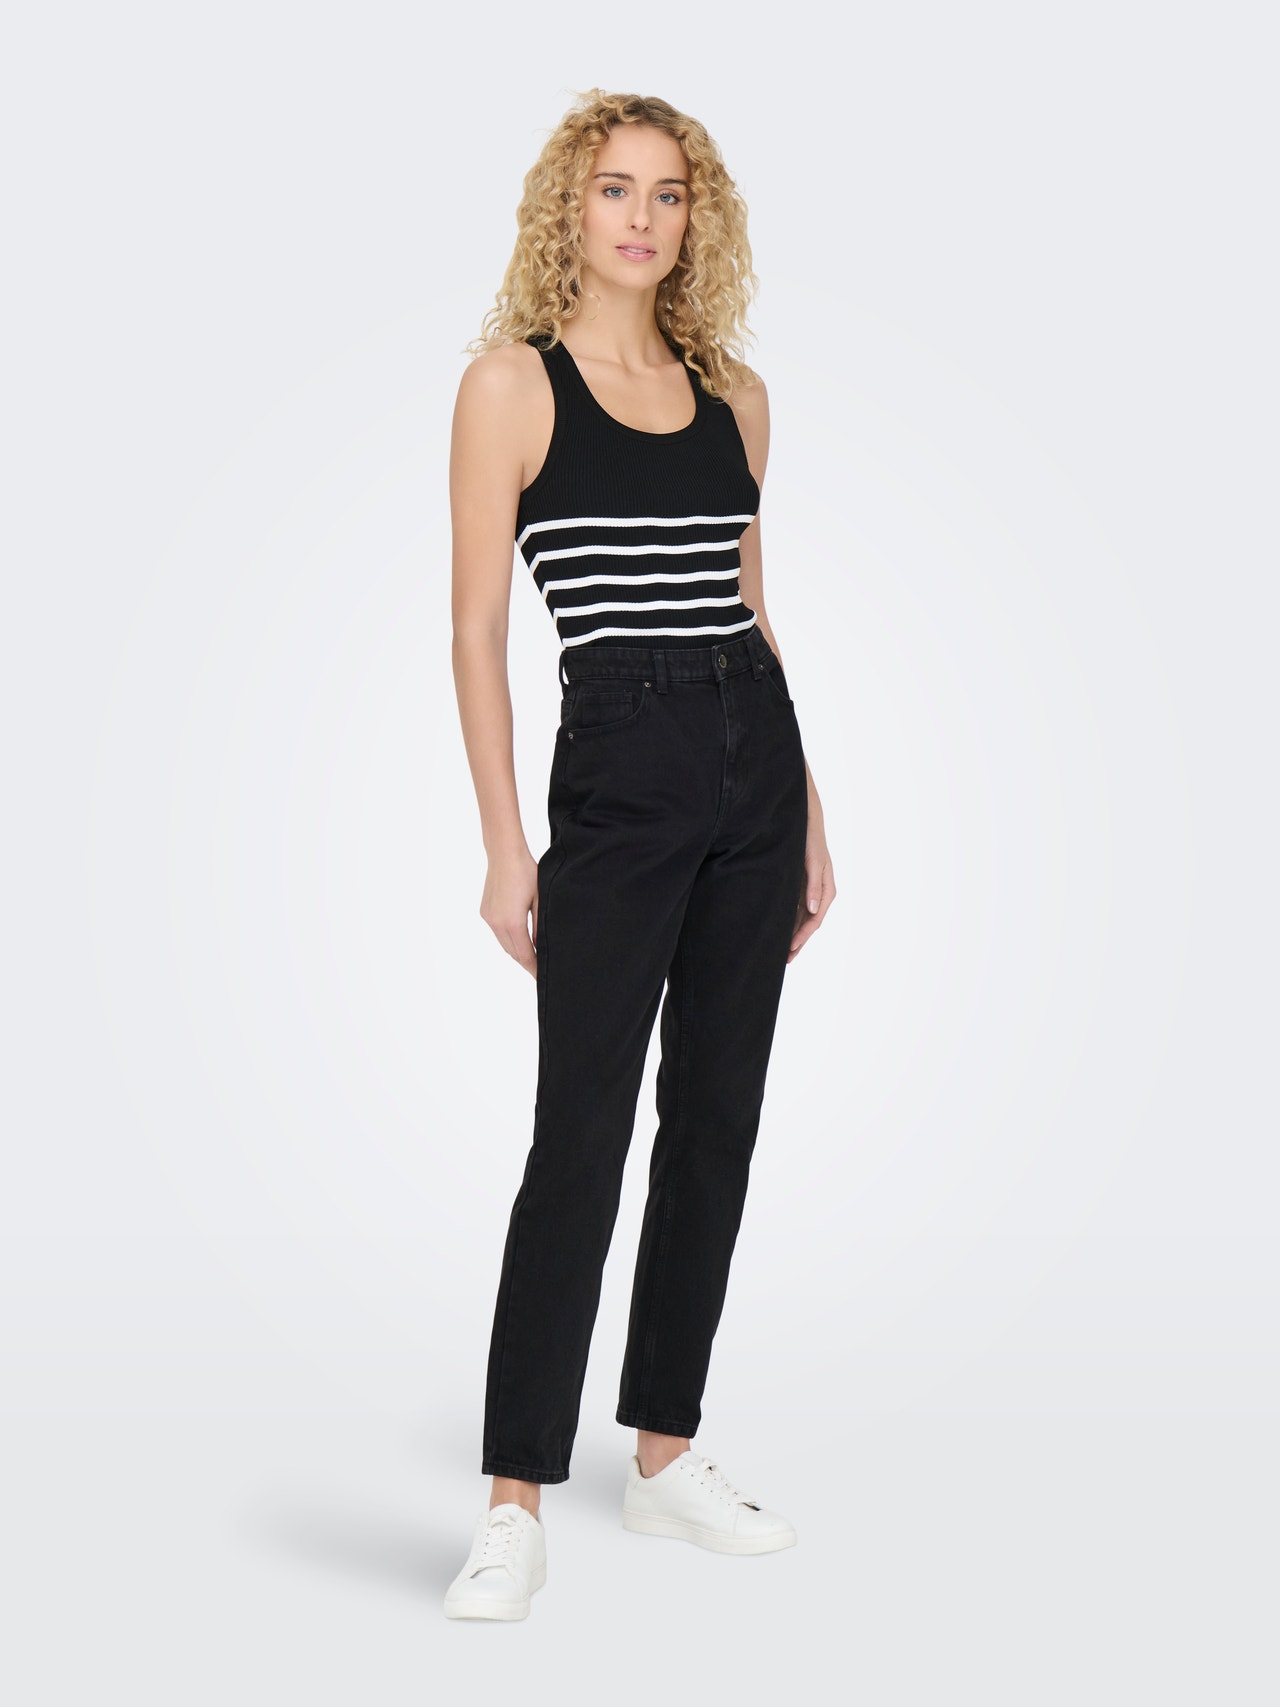 ONLY Knitted striped top -Black - 15318031